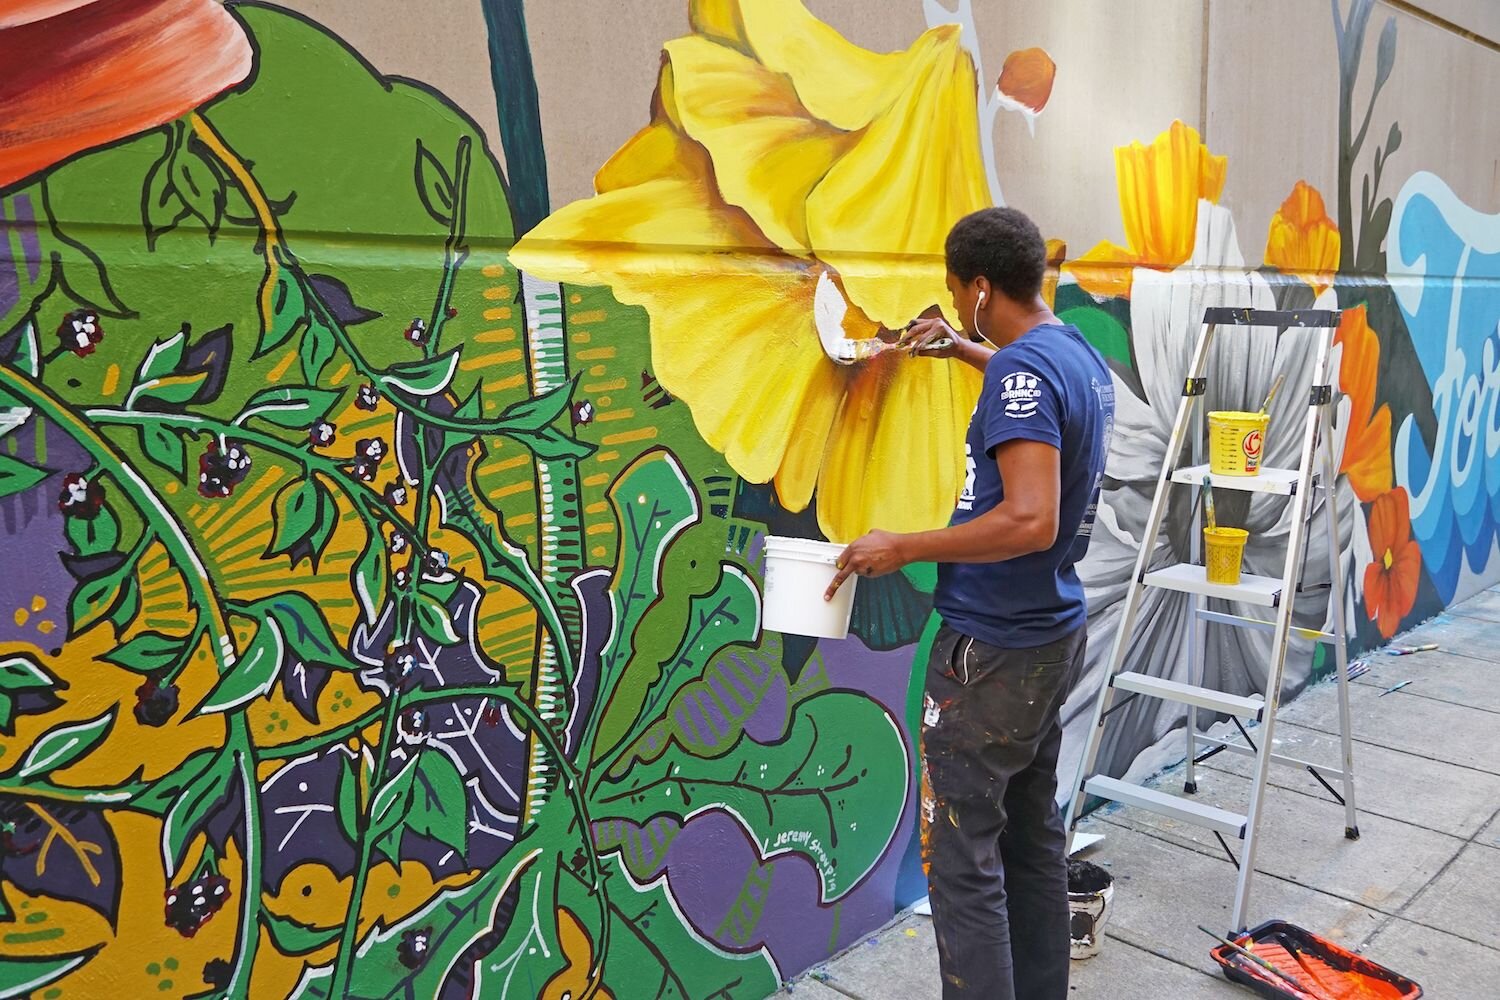 The Make It Your Own Mural Fest Sept. 8-18, 2020, will bring 11 murals to 11 regional communities of Northeast Indiana.